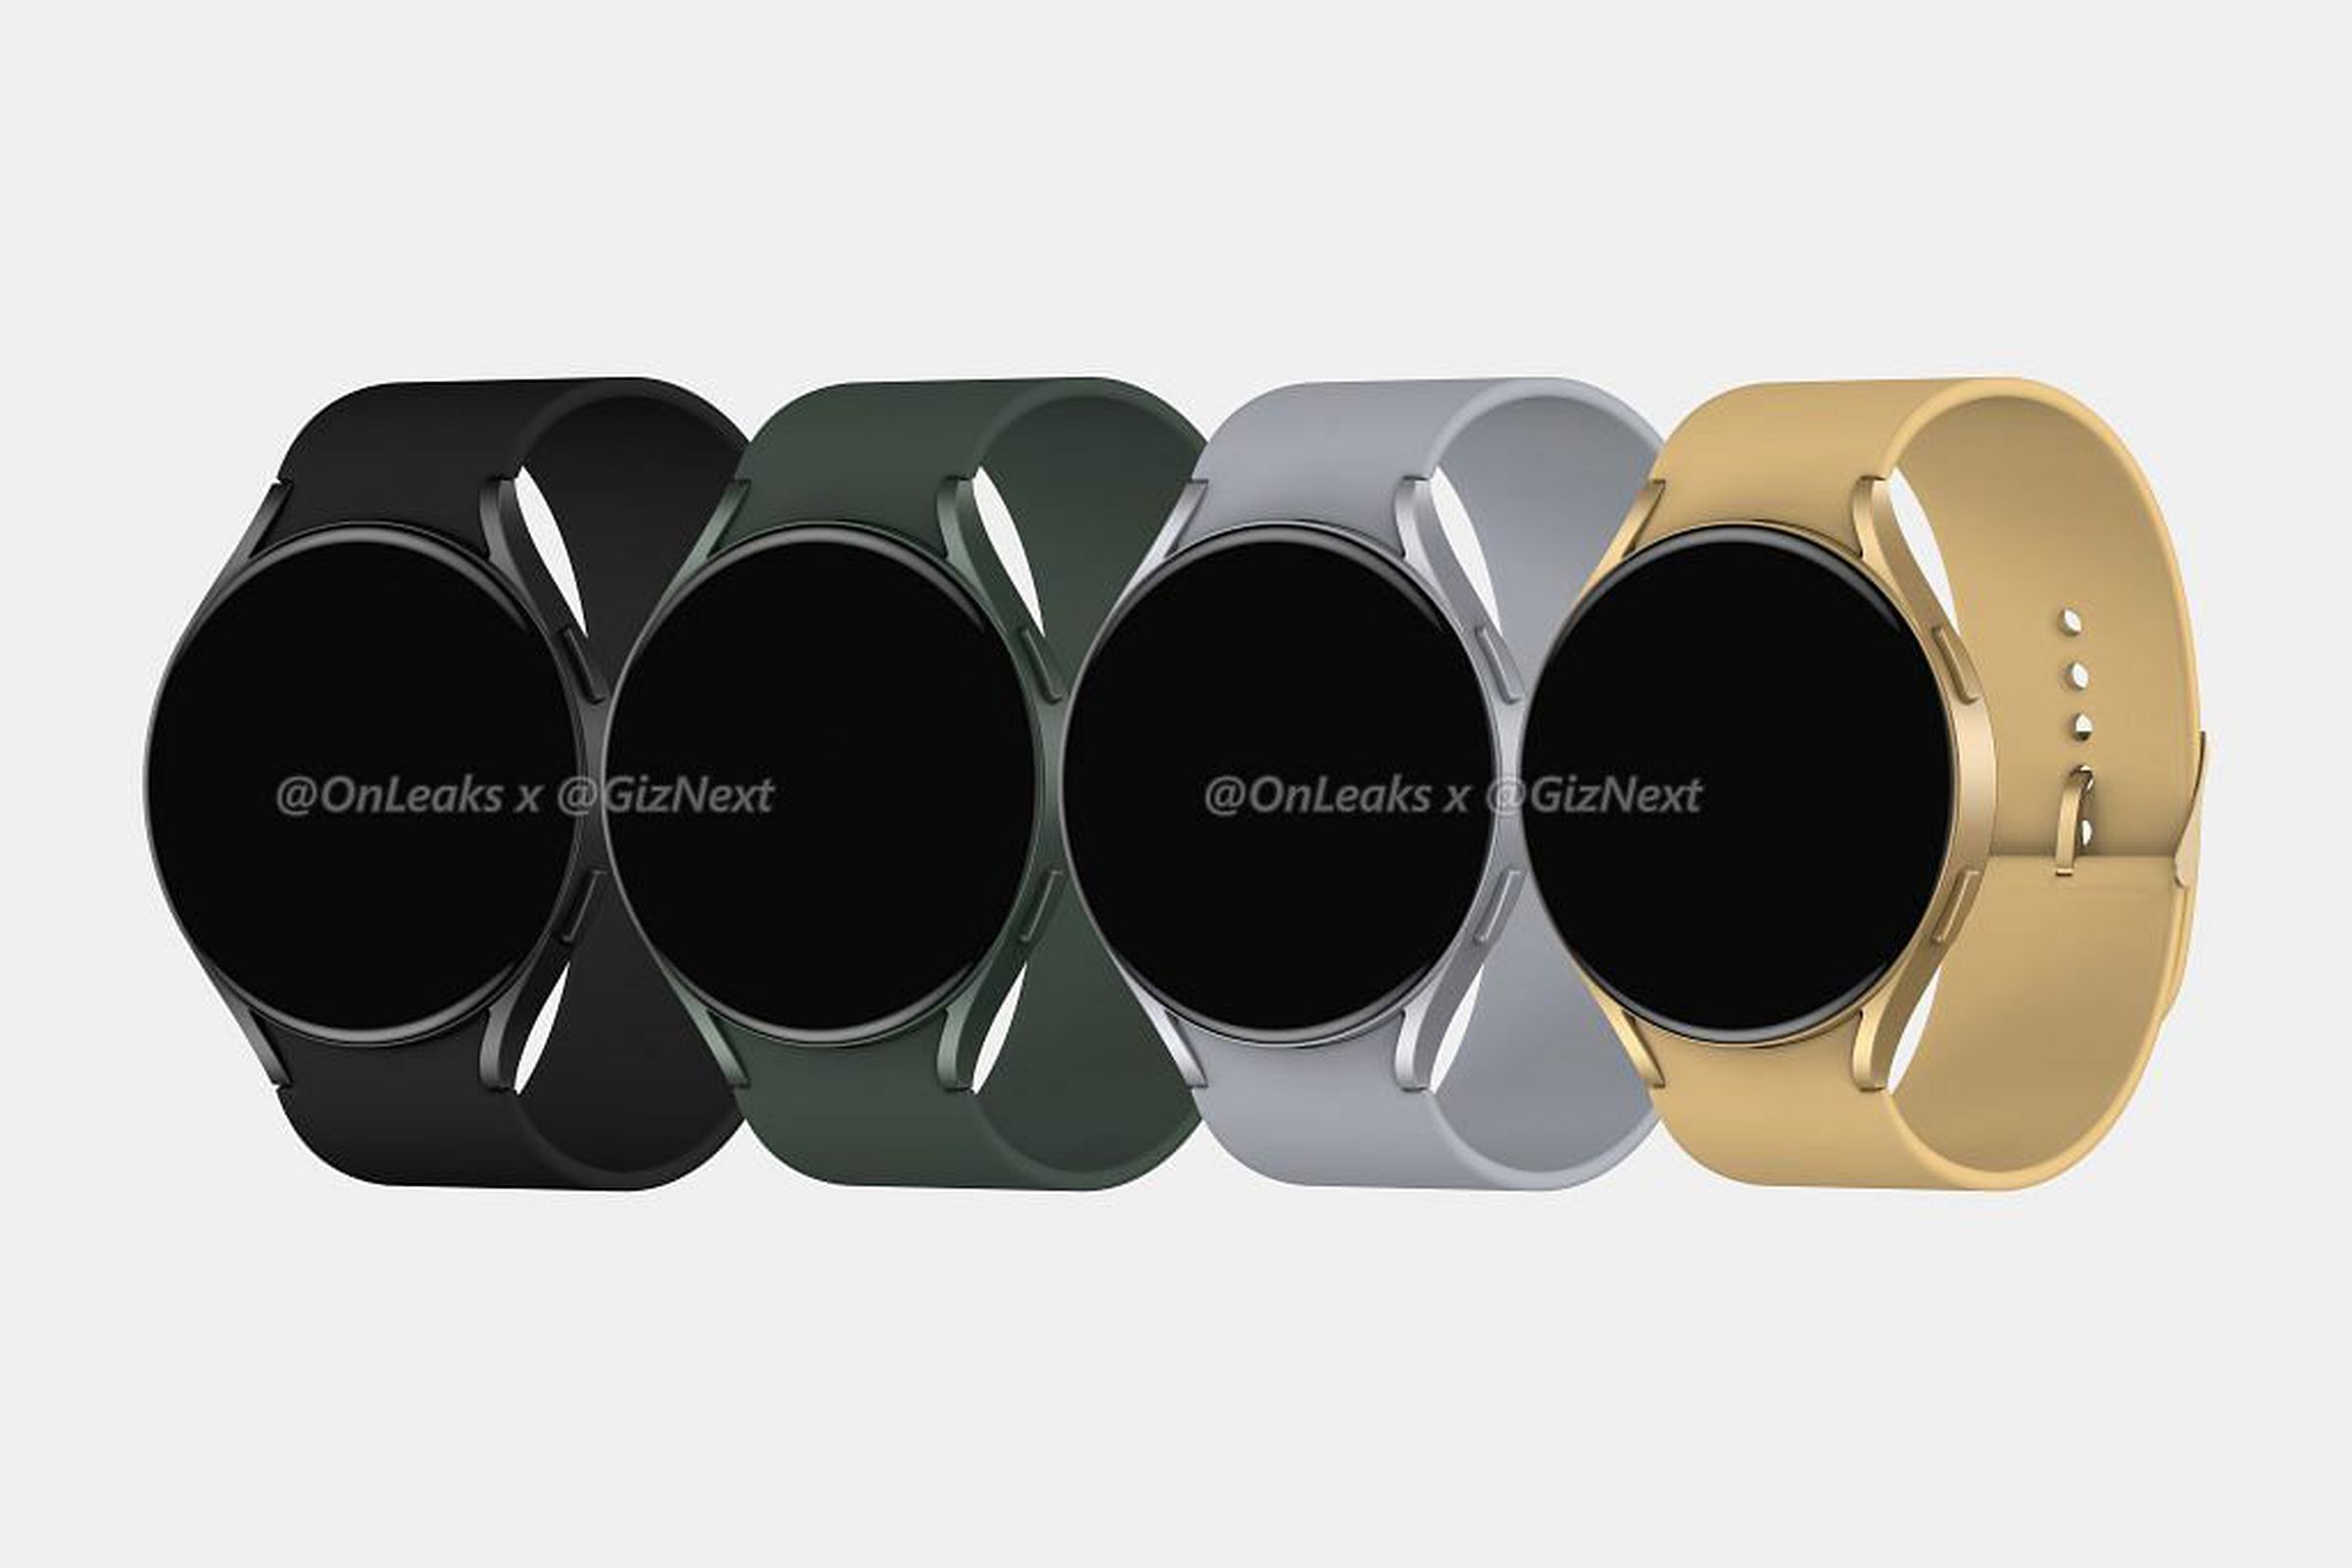 The watch will reportedly be available in four colors.